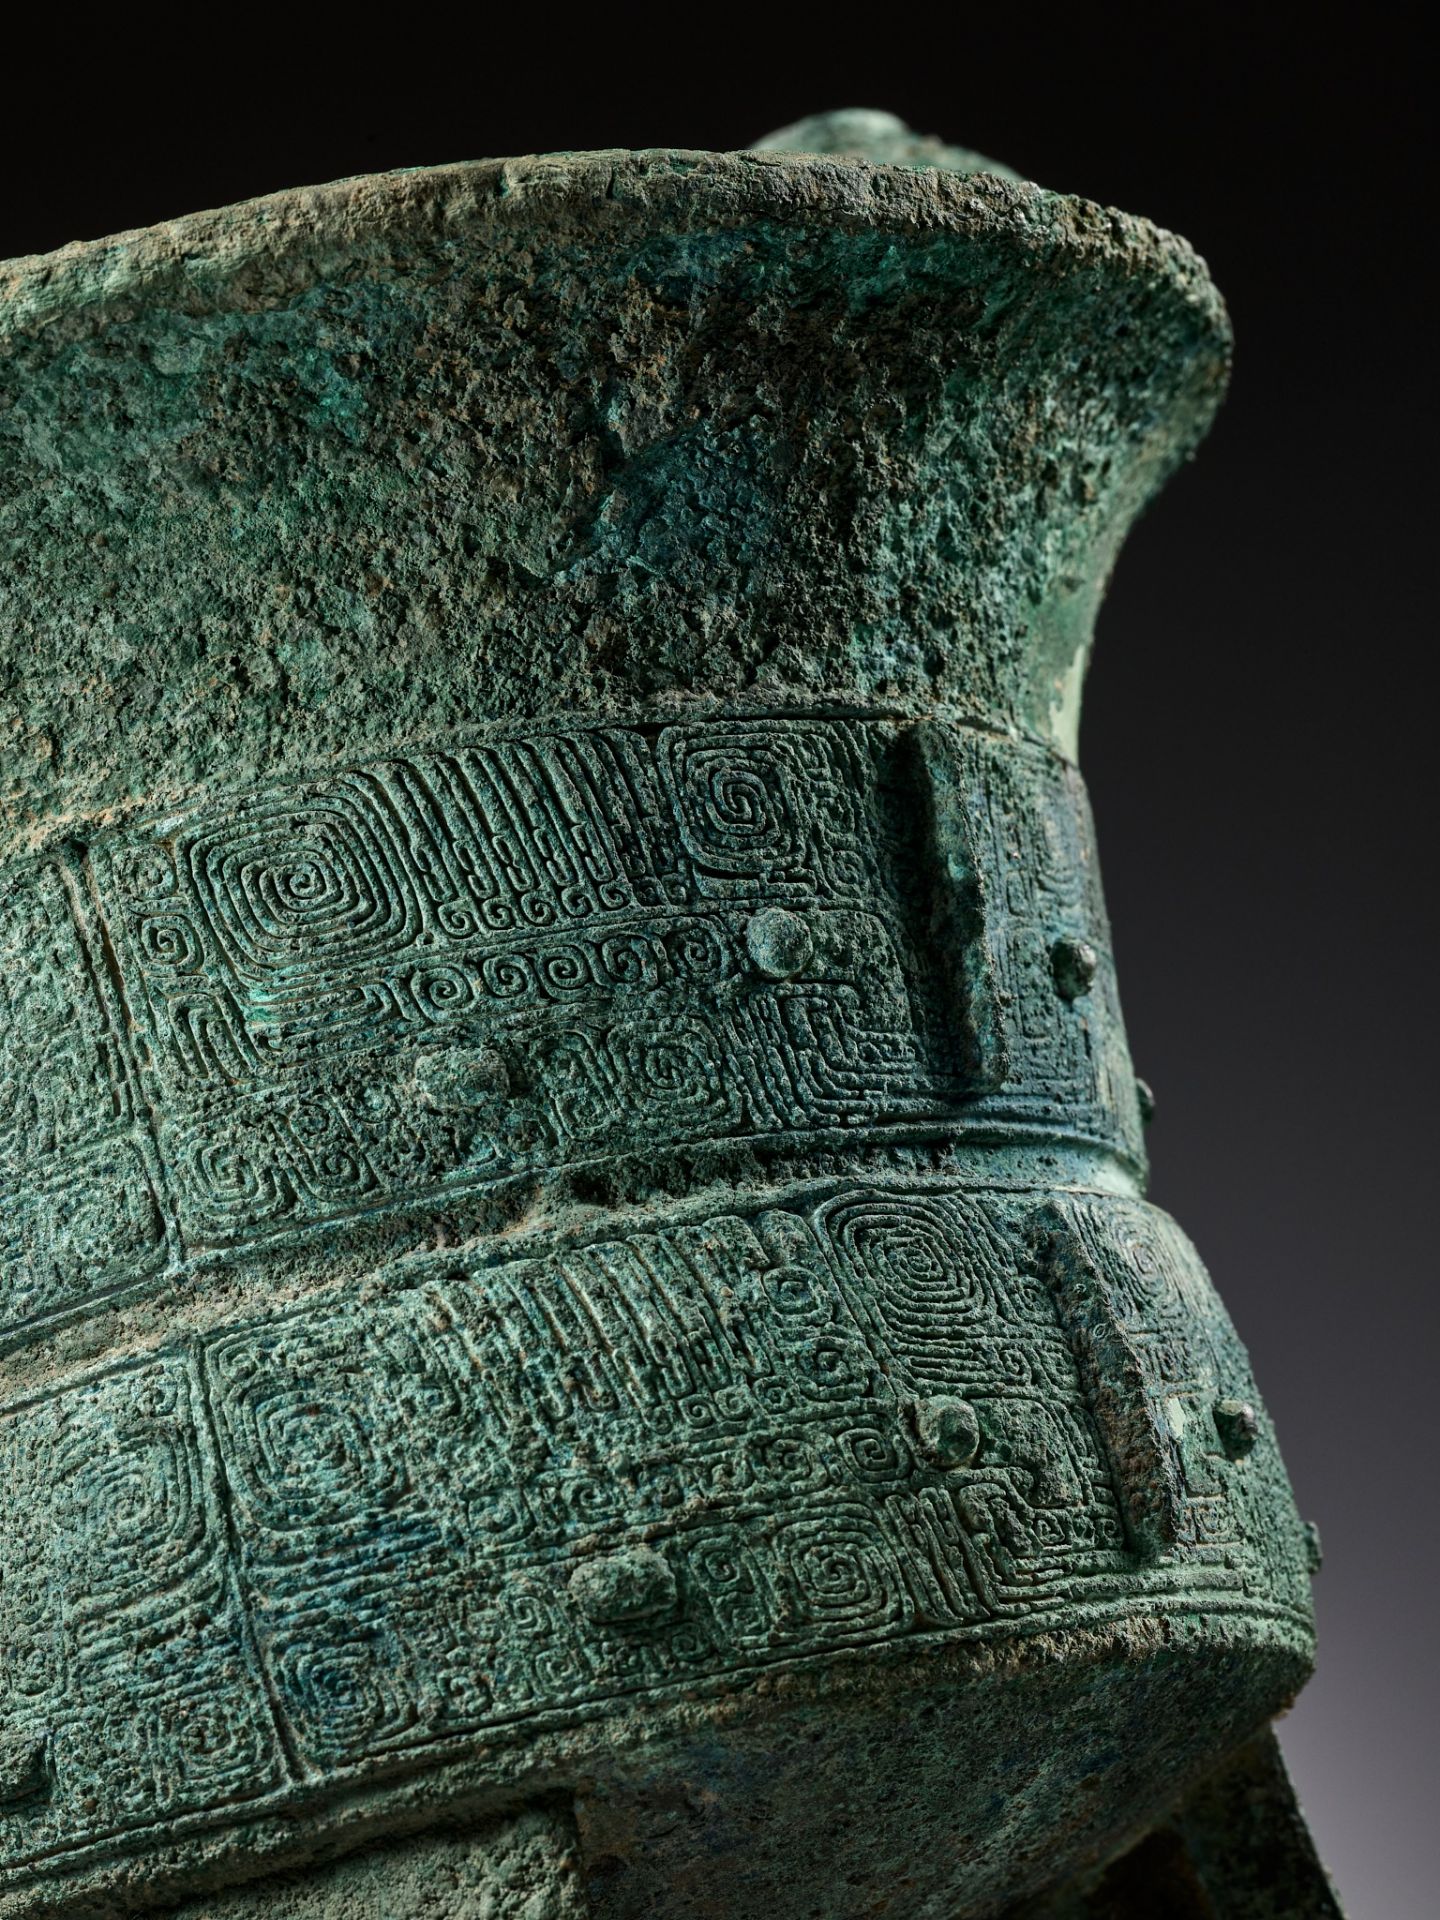 AN EXCEPTIONALLY LARGE AND MASSIVE BRONZE RITUAL TRIPOD WINE VESSEL, JIA, WITH A CLAN MARK, SHANG - Image 5 of 29